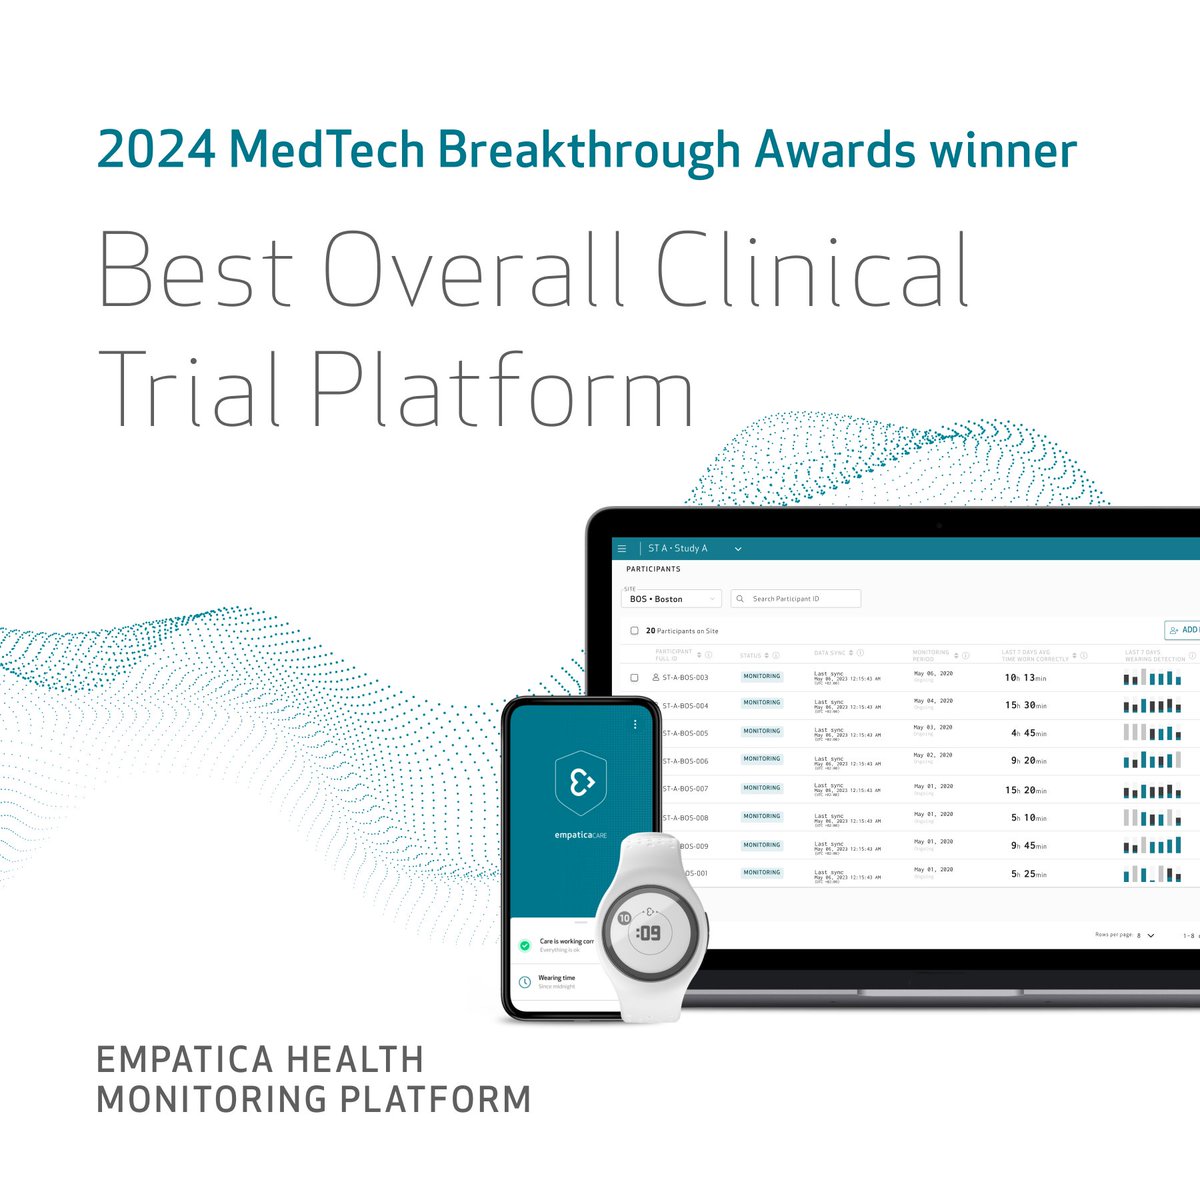 🏆 We’re thrilled to announce that Empatica has been selected as a winner in the 2024 #MedTech Breakthrough Awards program, taking home the “Best Overall Clinical Trial Platform” award! ⌚💻The Empatica Health Monitoring Platform is FDA-cleared, and consists of the medical-grade…